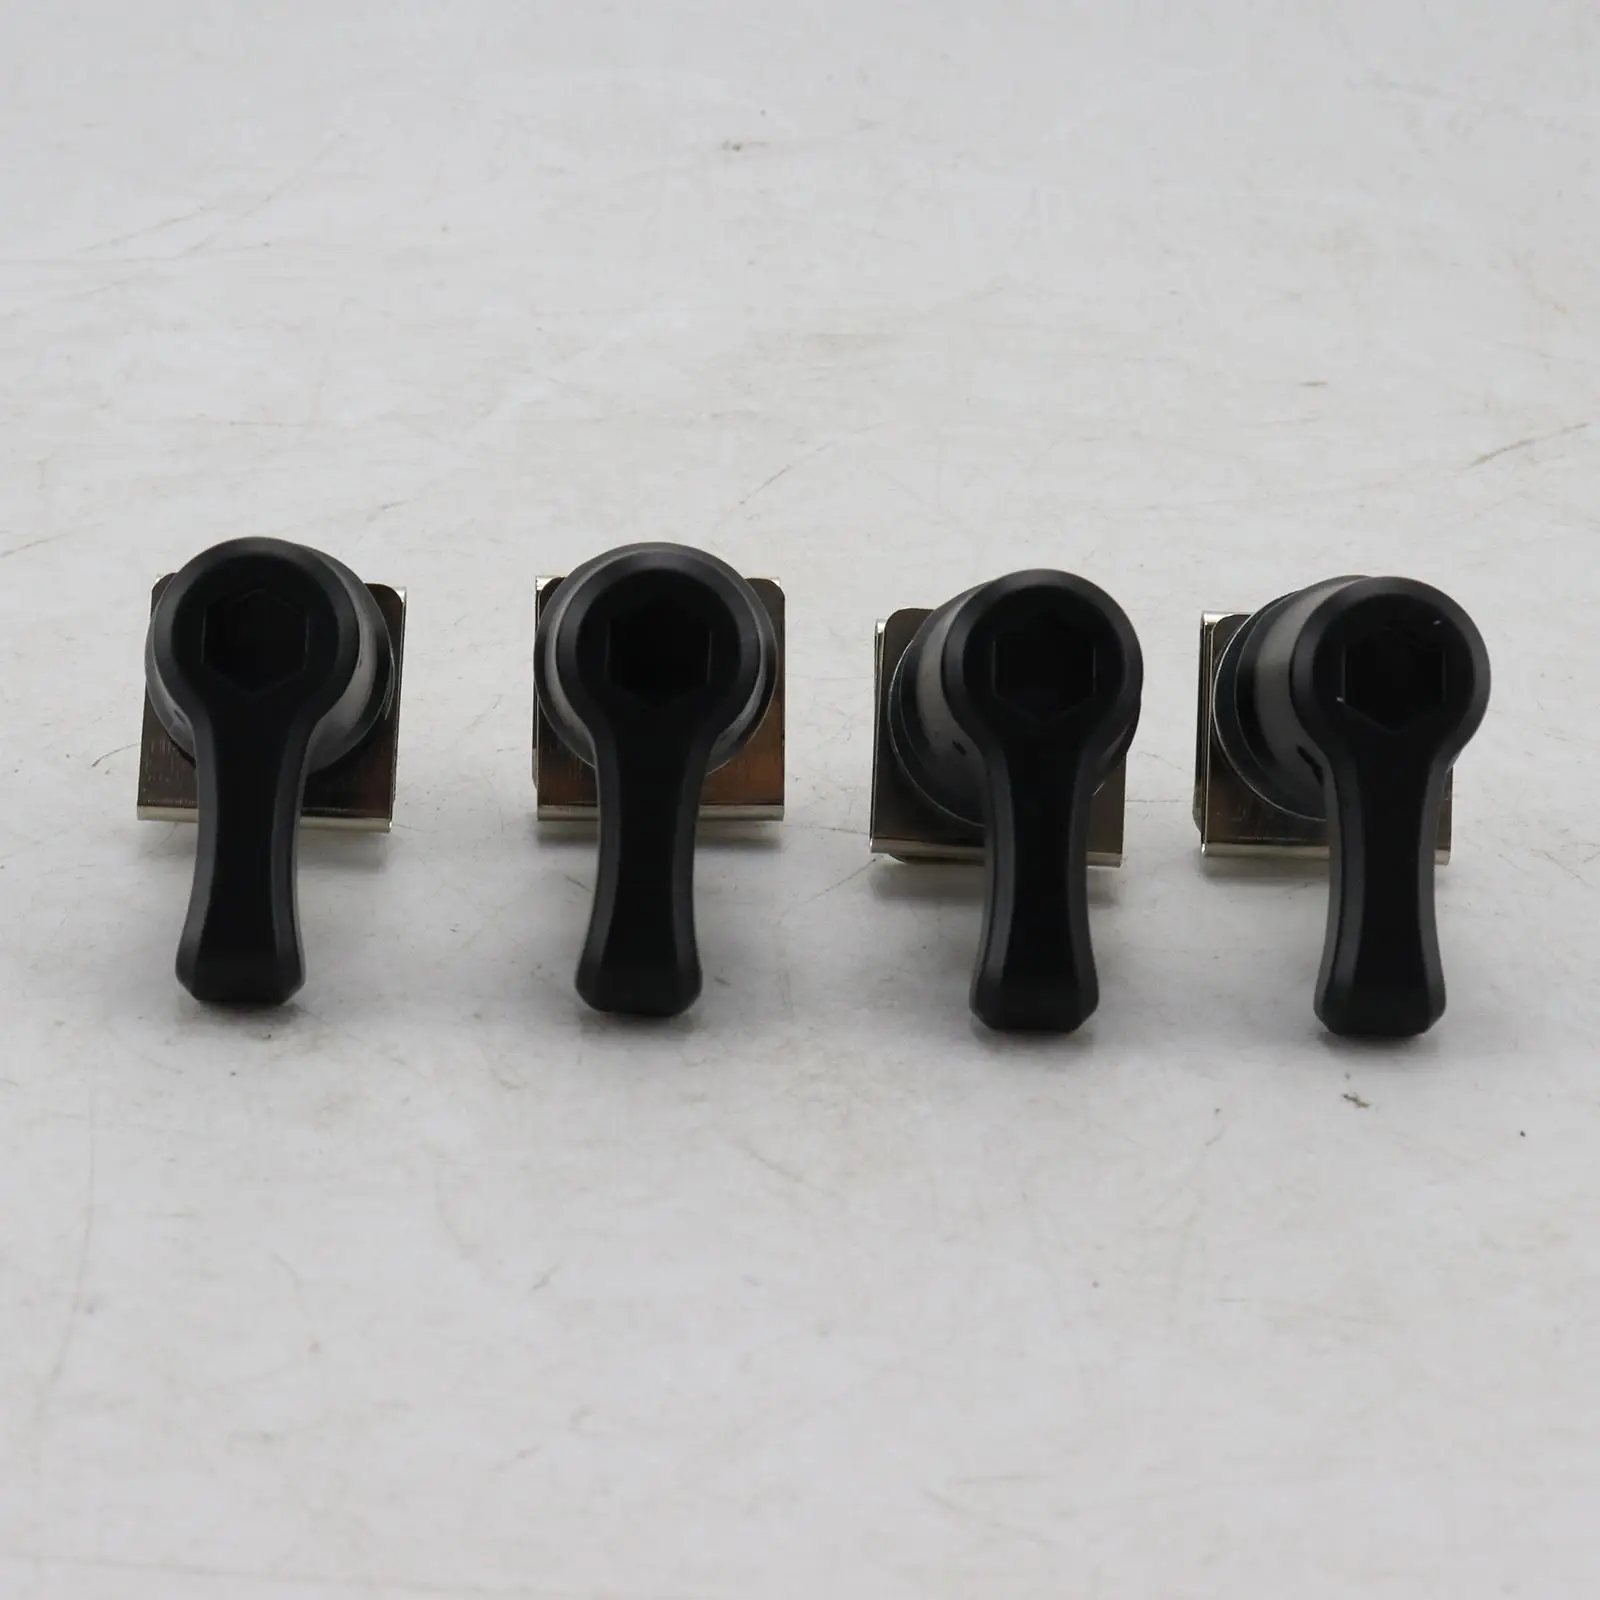 4 Pieces 90201540 Saddlebag Mounting Hardware Replacement Bolt nut Block Fastener for Touring  Supplies Motorbike Parts